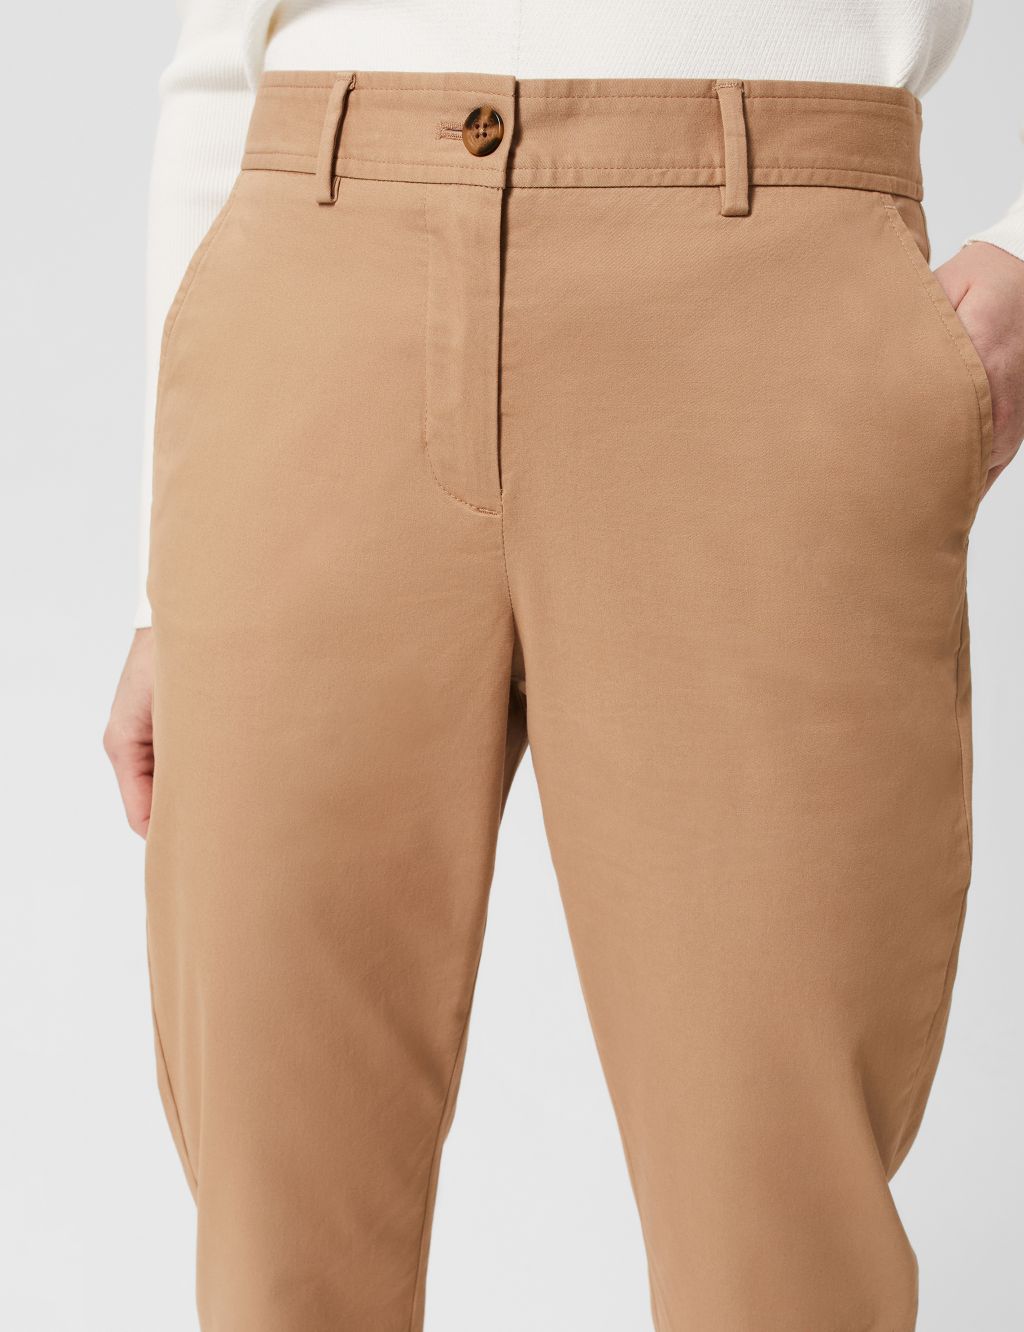 Cotton Rich Chinos image 3